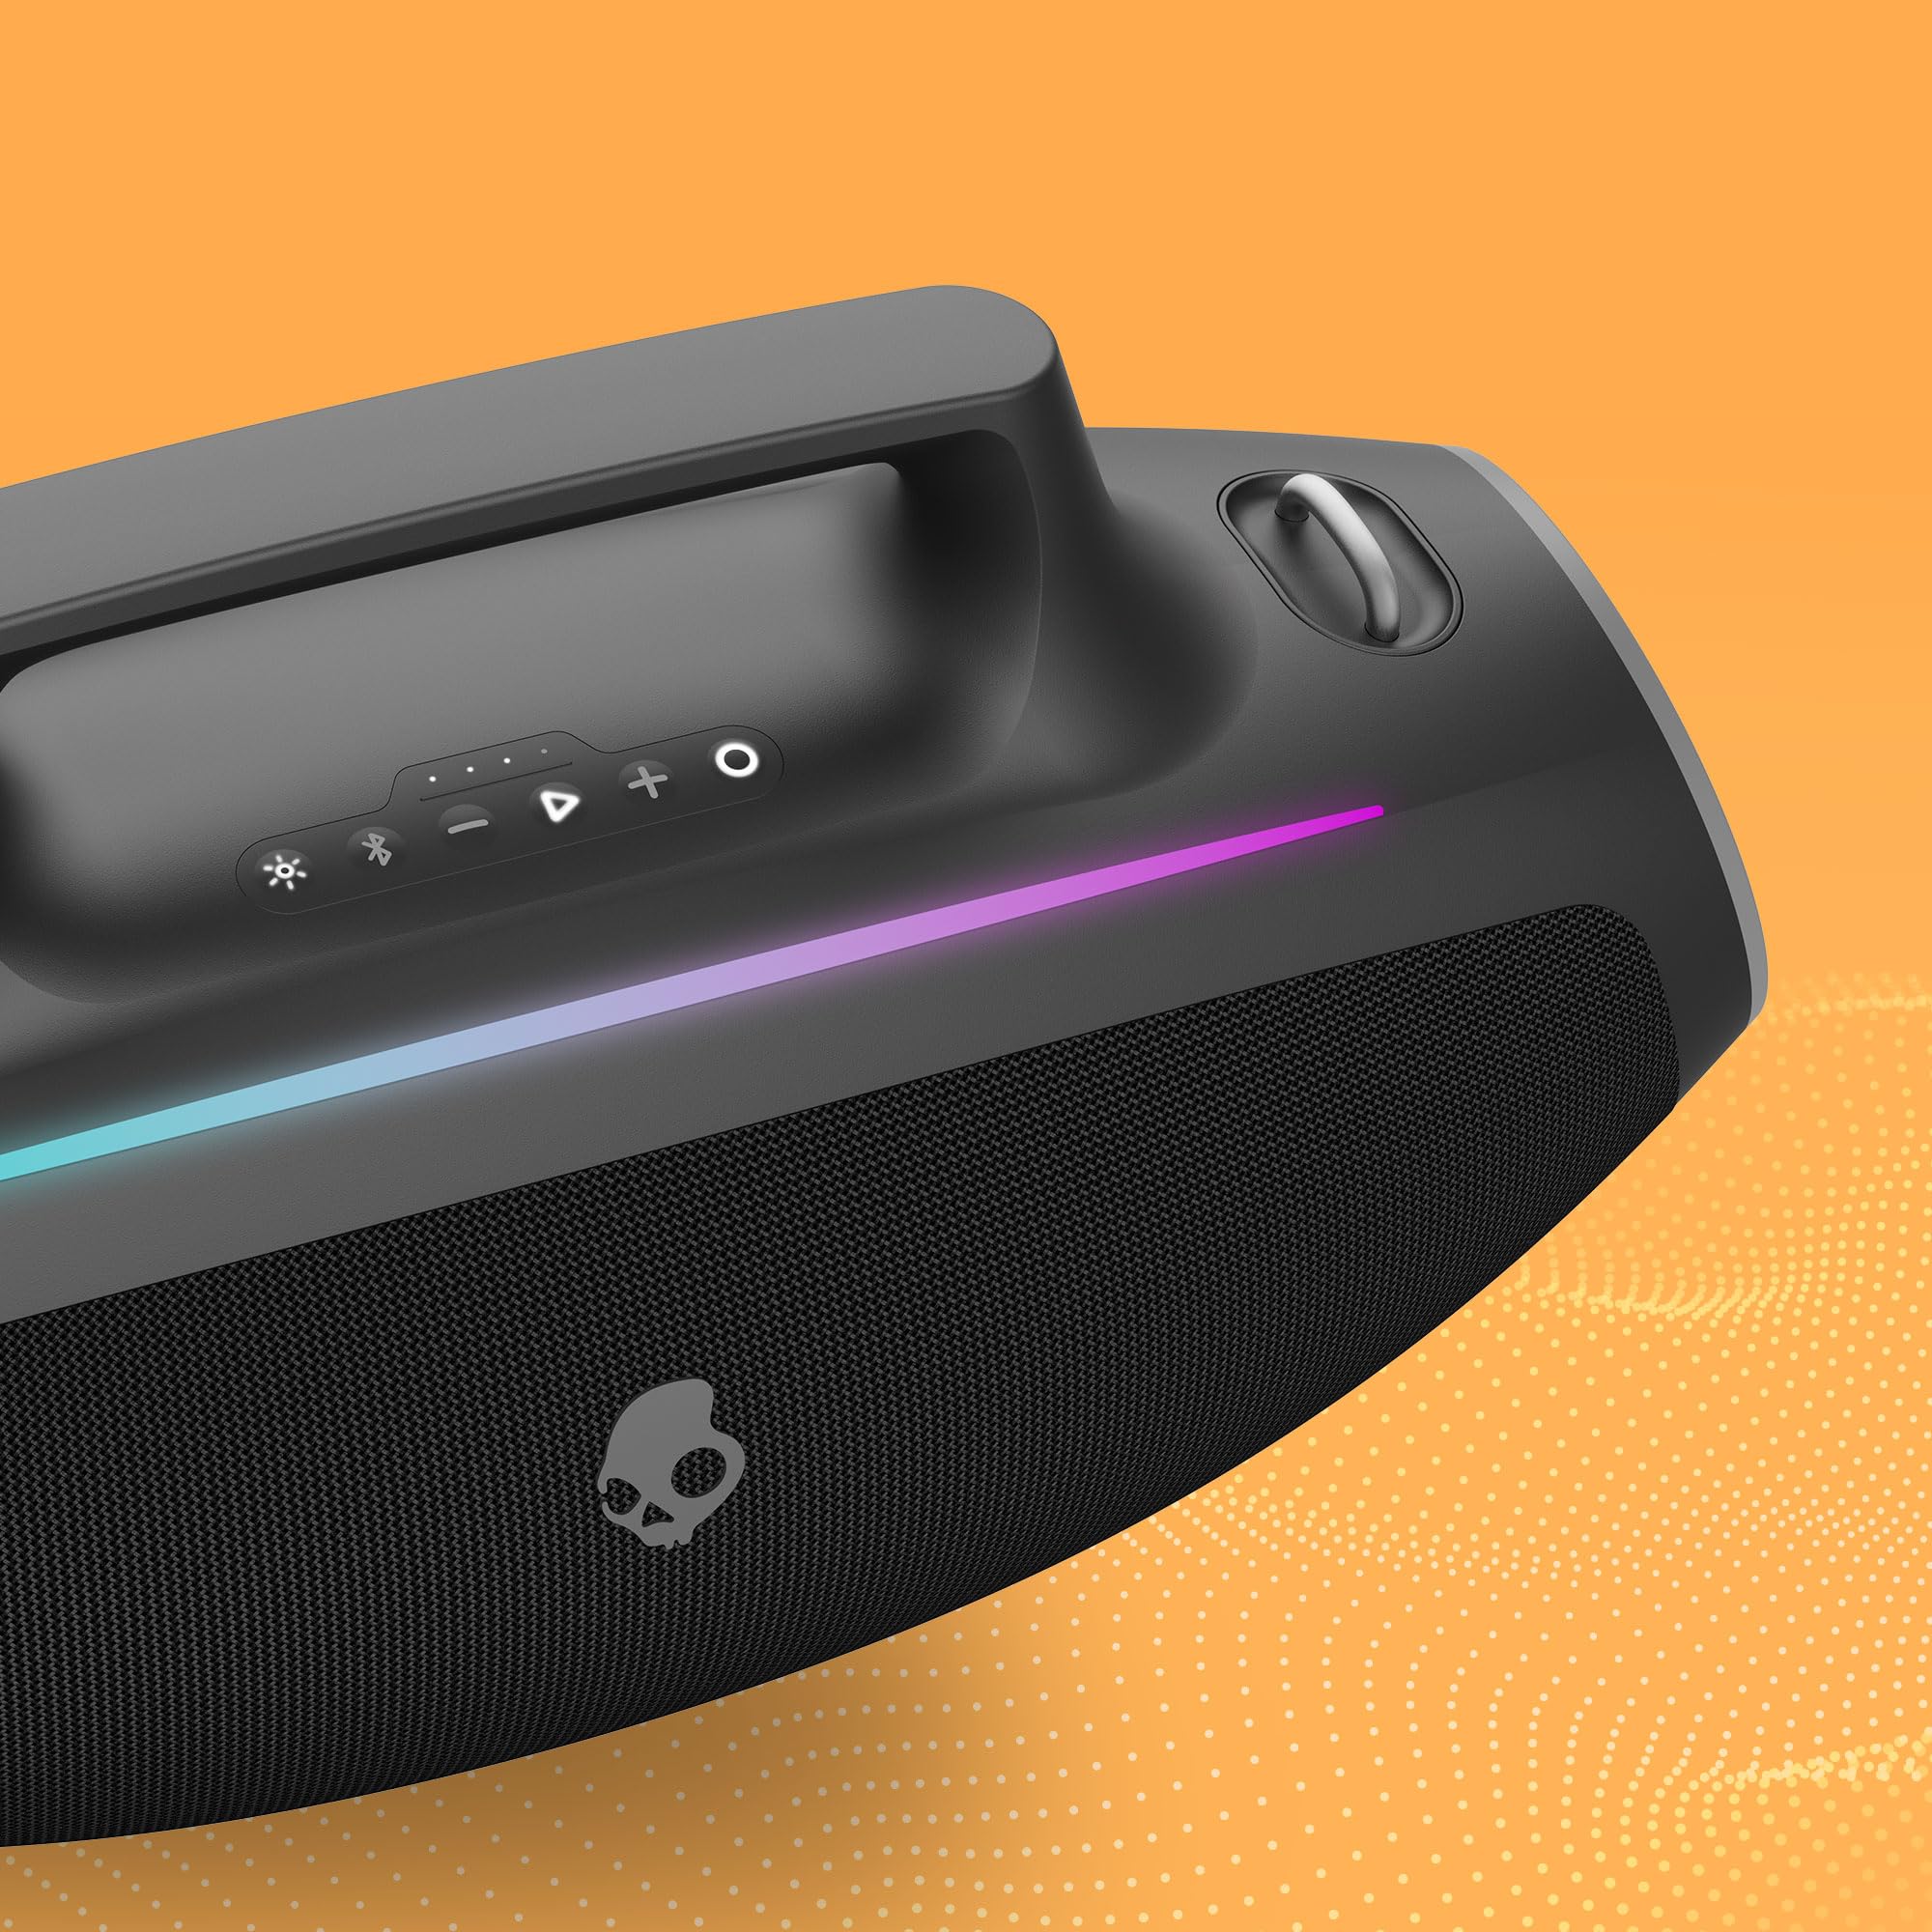 Skullcandy Barrel Bluetooth Boombox Speaker – Water-Resistant Wireless Portable Speaker, with LED Lightshow Mode, 12 Hour Battery, Multi-Link, & USB-C & USB-A Output Charging